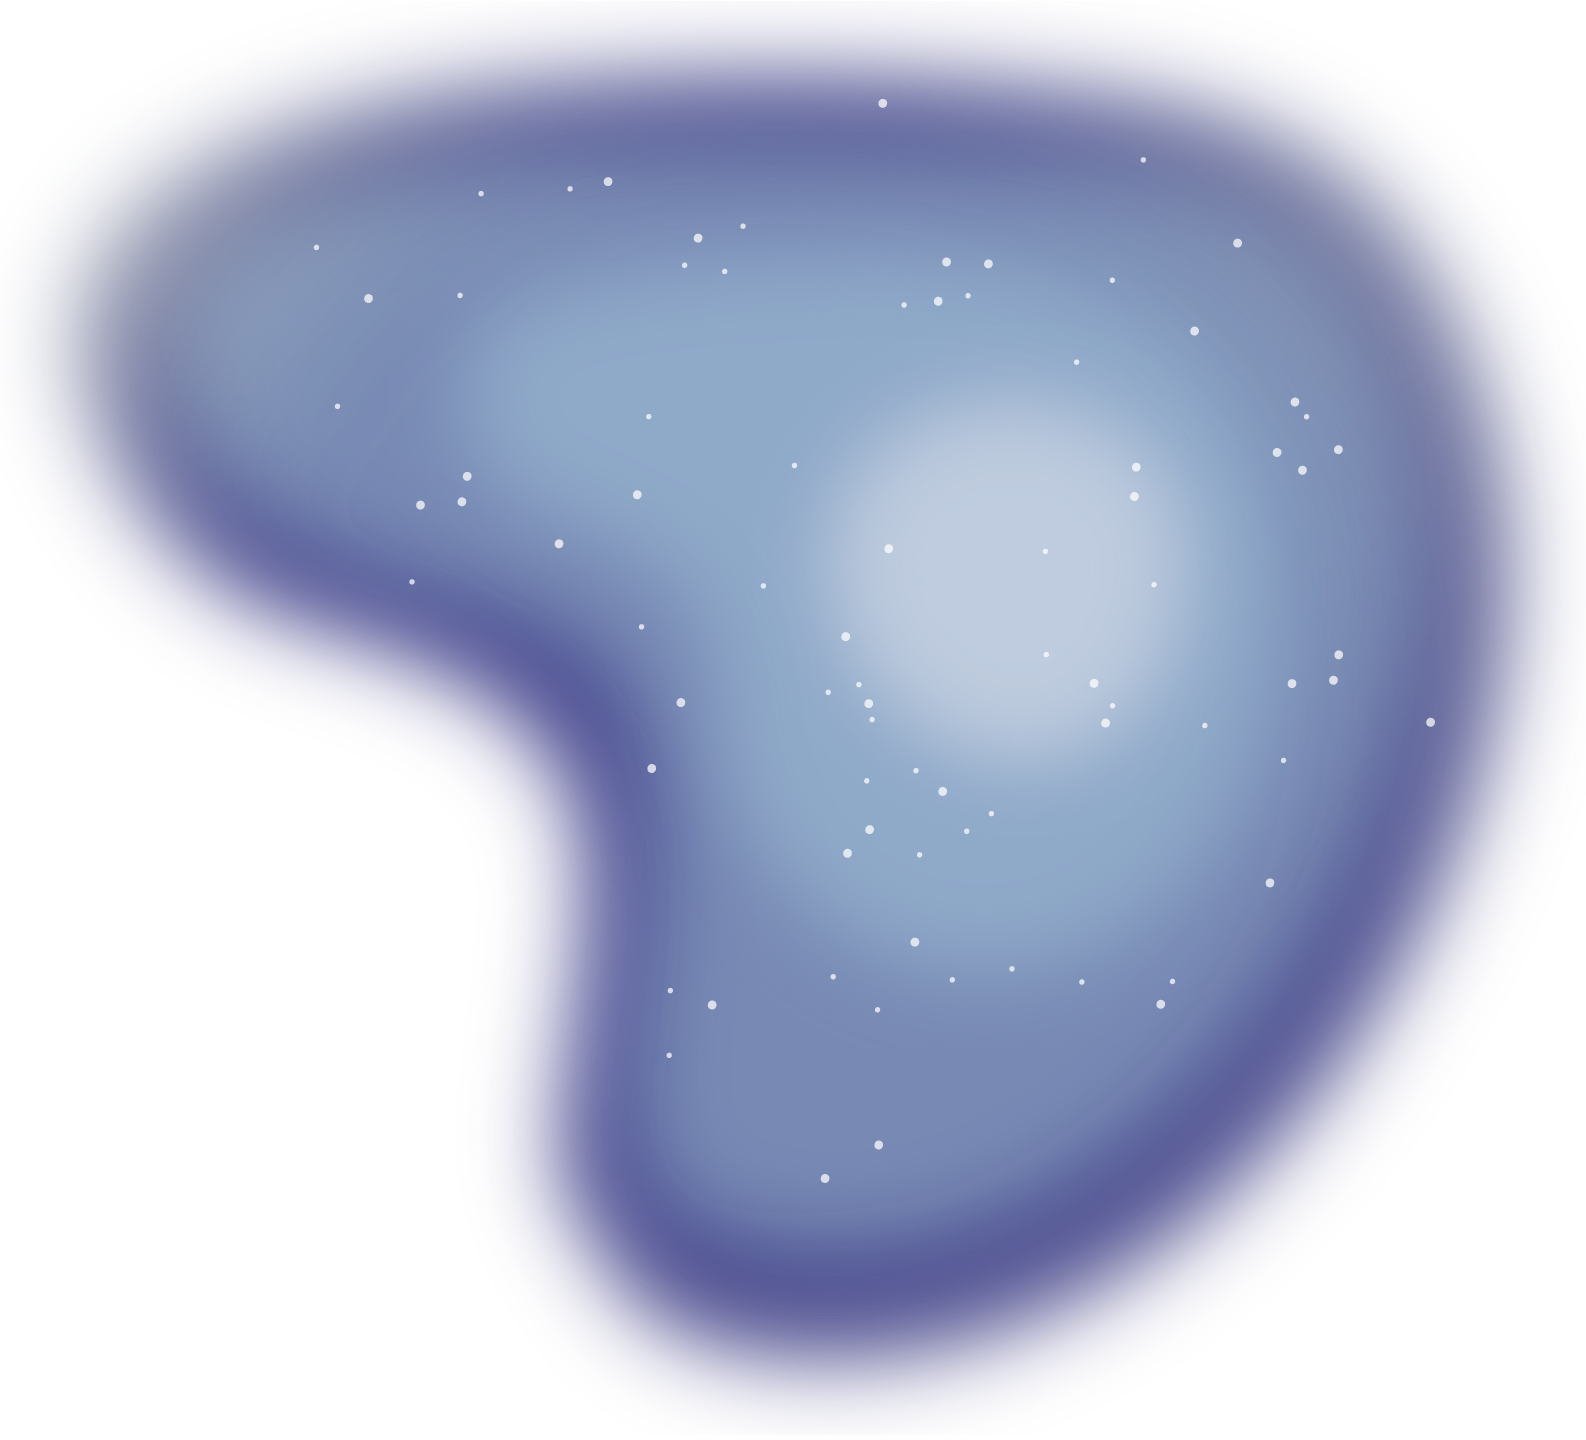 A rounded, boomerang-shaped diffuse purple blob that's darker around the rim with a light, whitish center. White dots representing stars speckle the image.